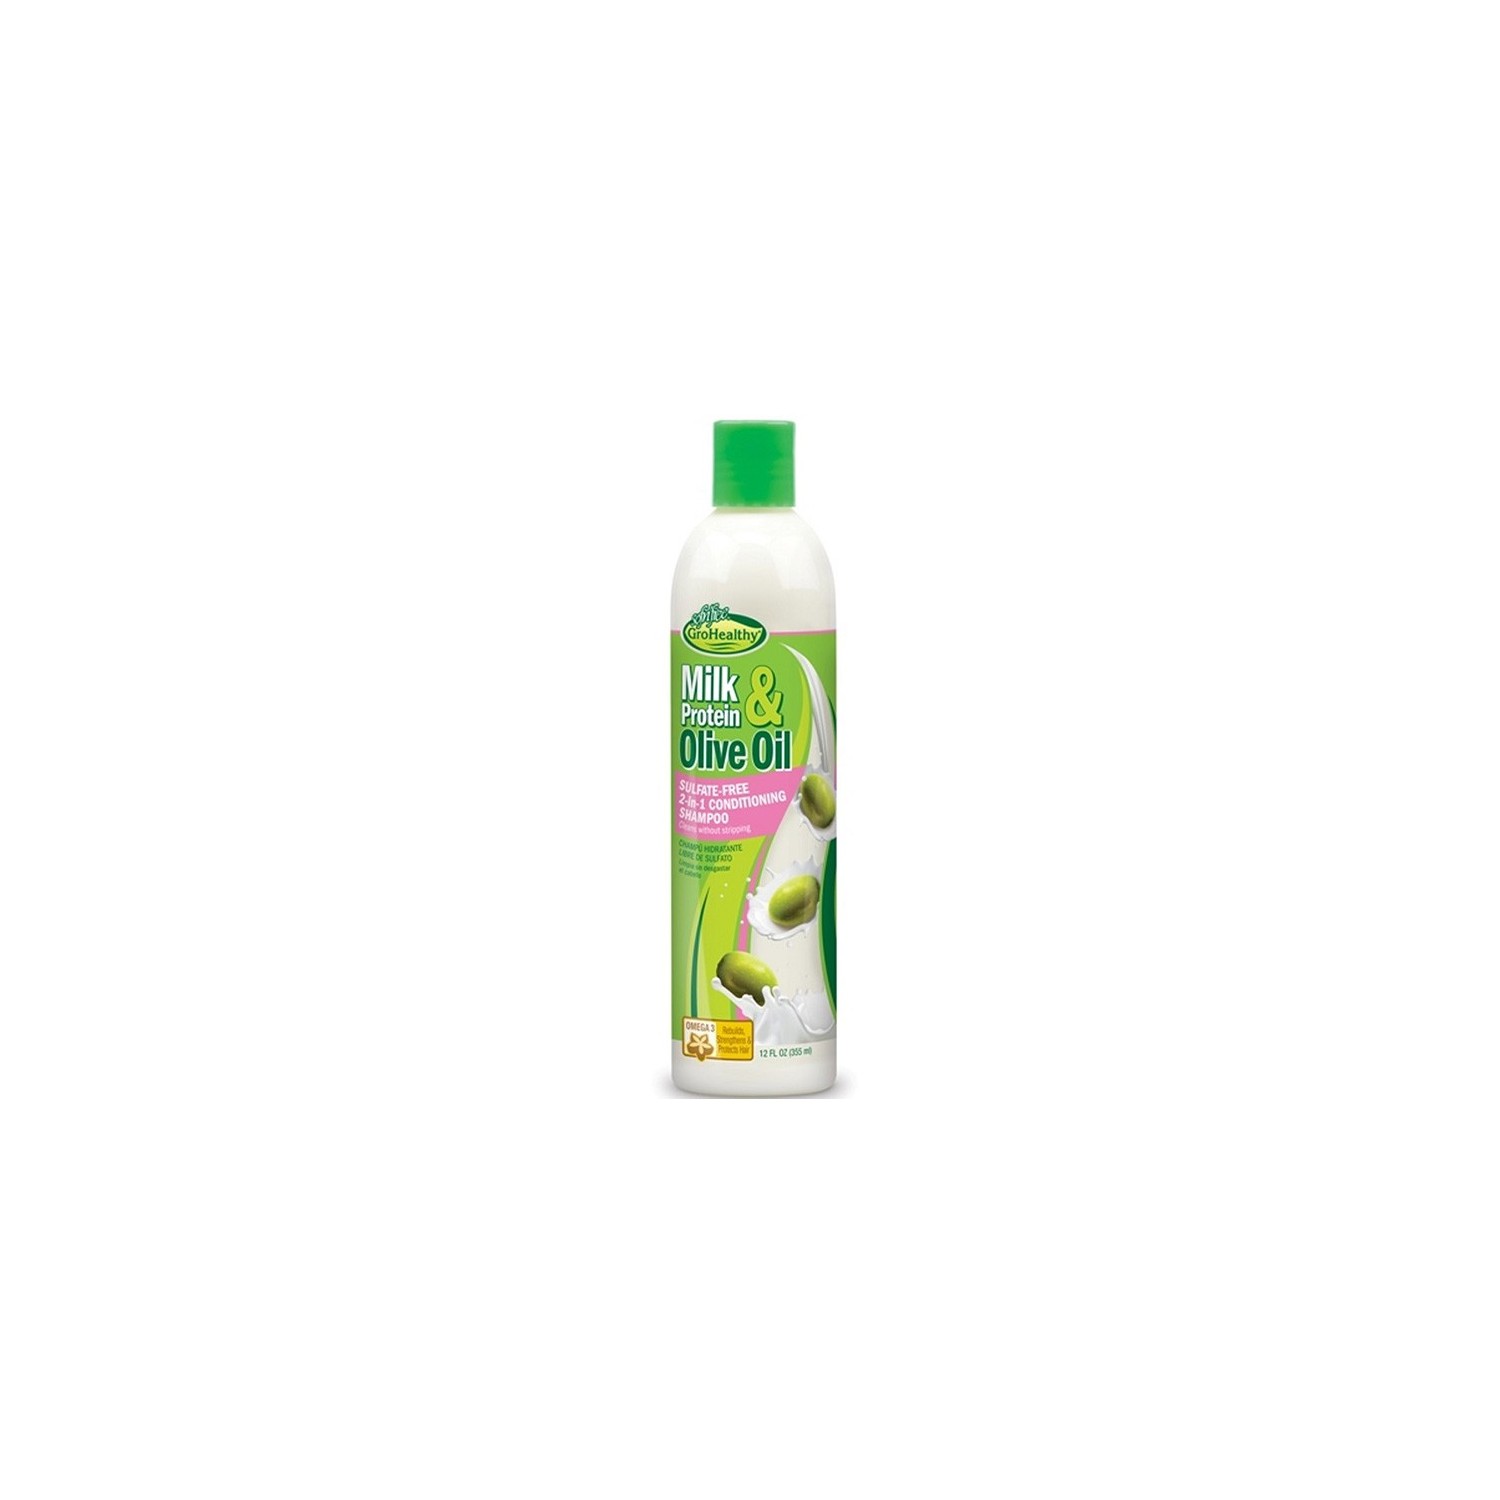 Sofn Free Grohealthy Milk Proteins & Olive Oil 2 In 1 Shampoo Conditioner 355 ml